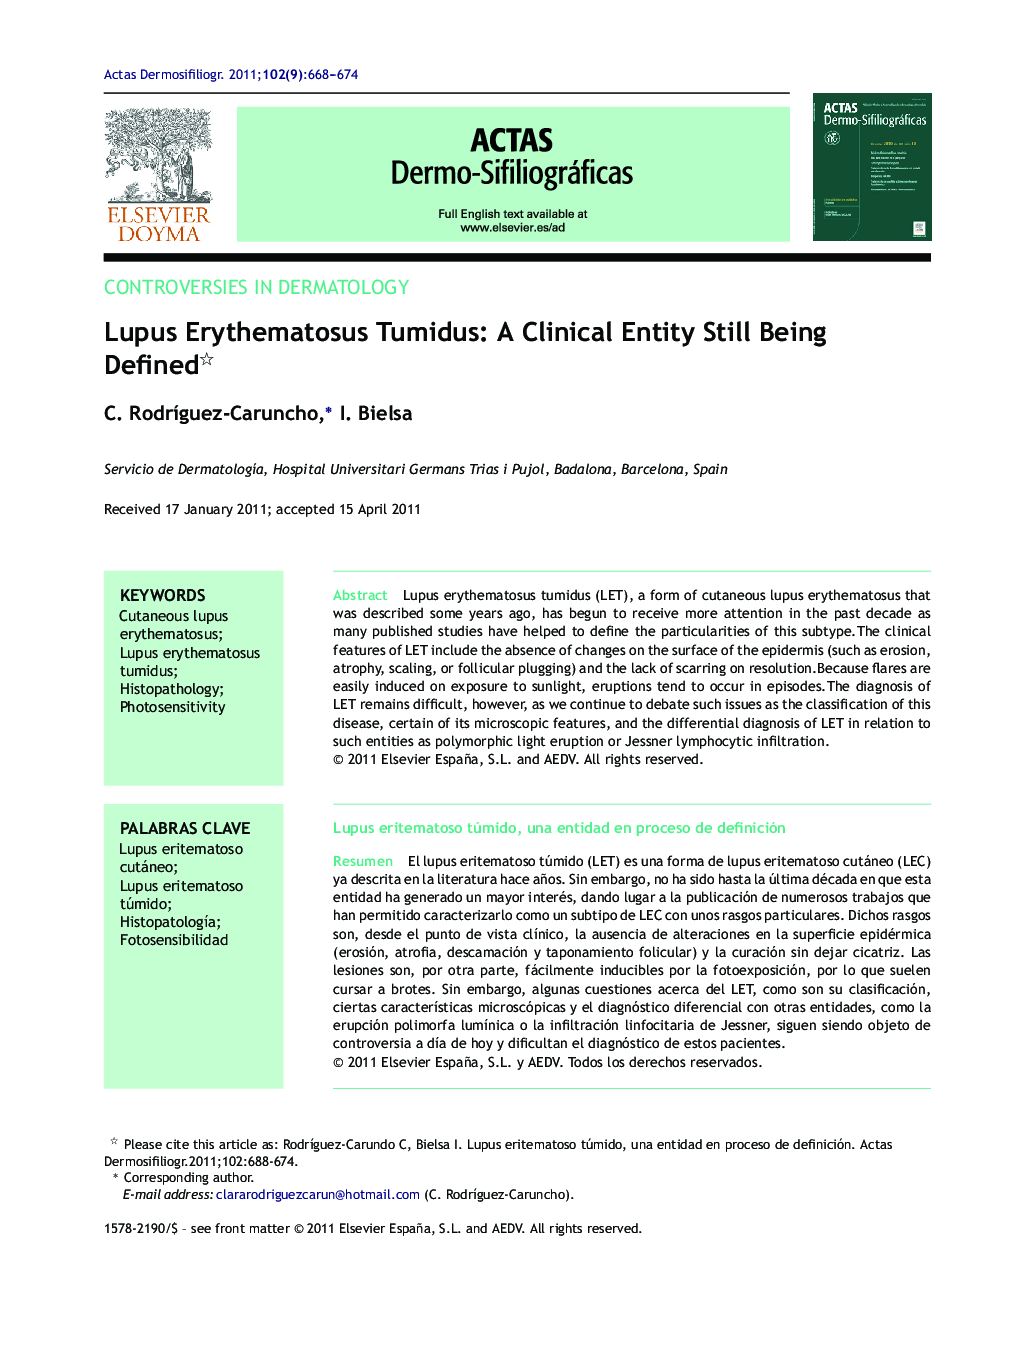 Lupus Erythematosus Tumidus: A Clinical Entity Still Being Defined 